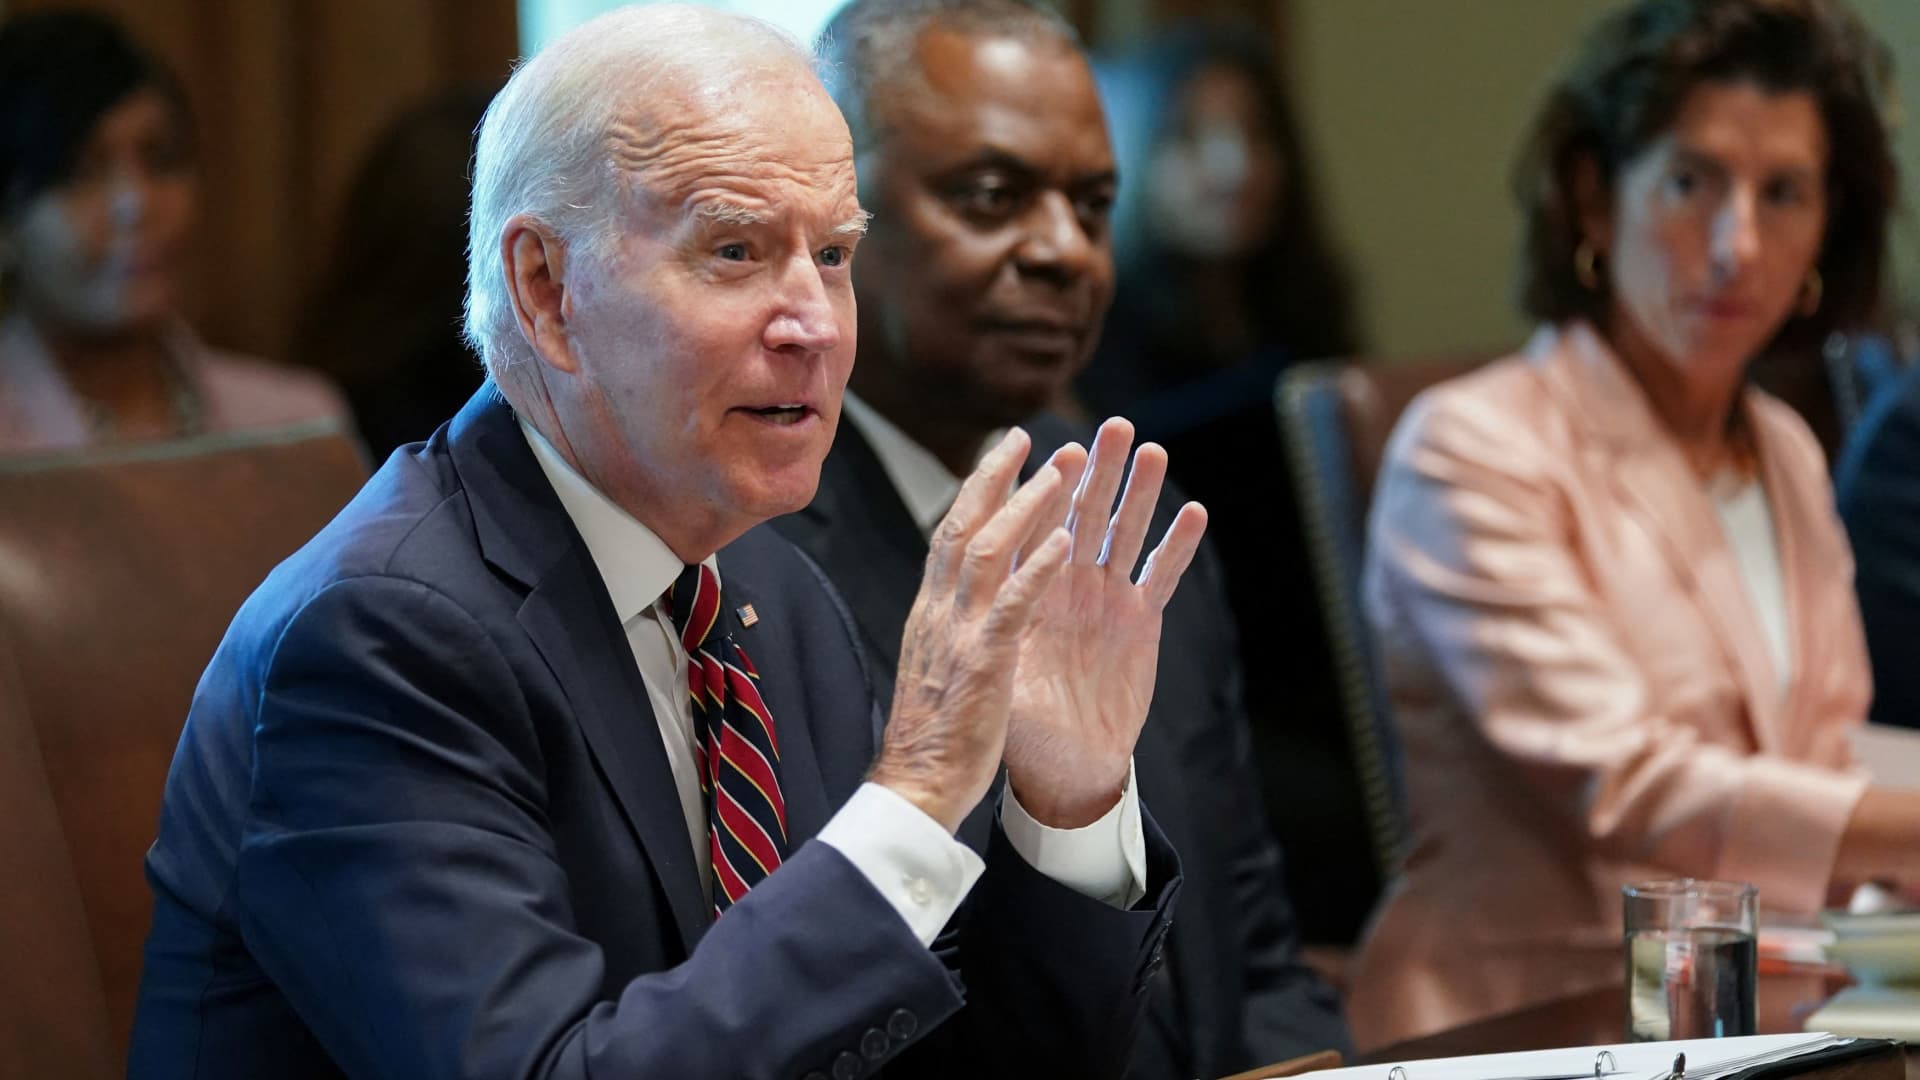 Biden says he’s ‘sure’ he will see Xi at the G-20 summit if Chinese president attends